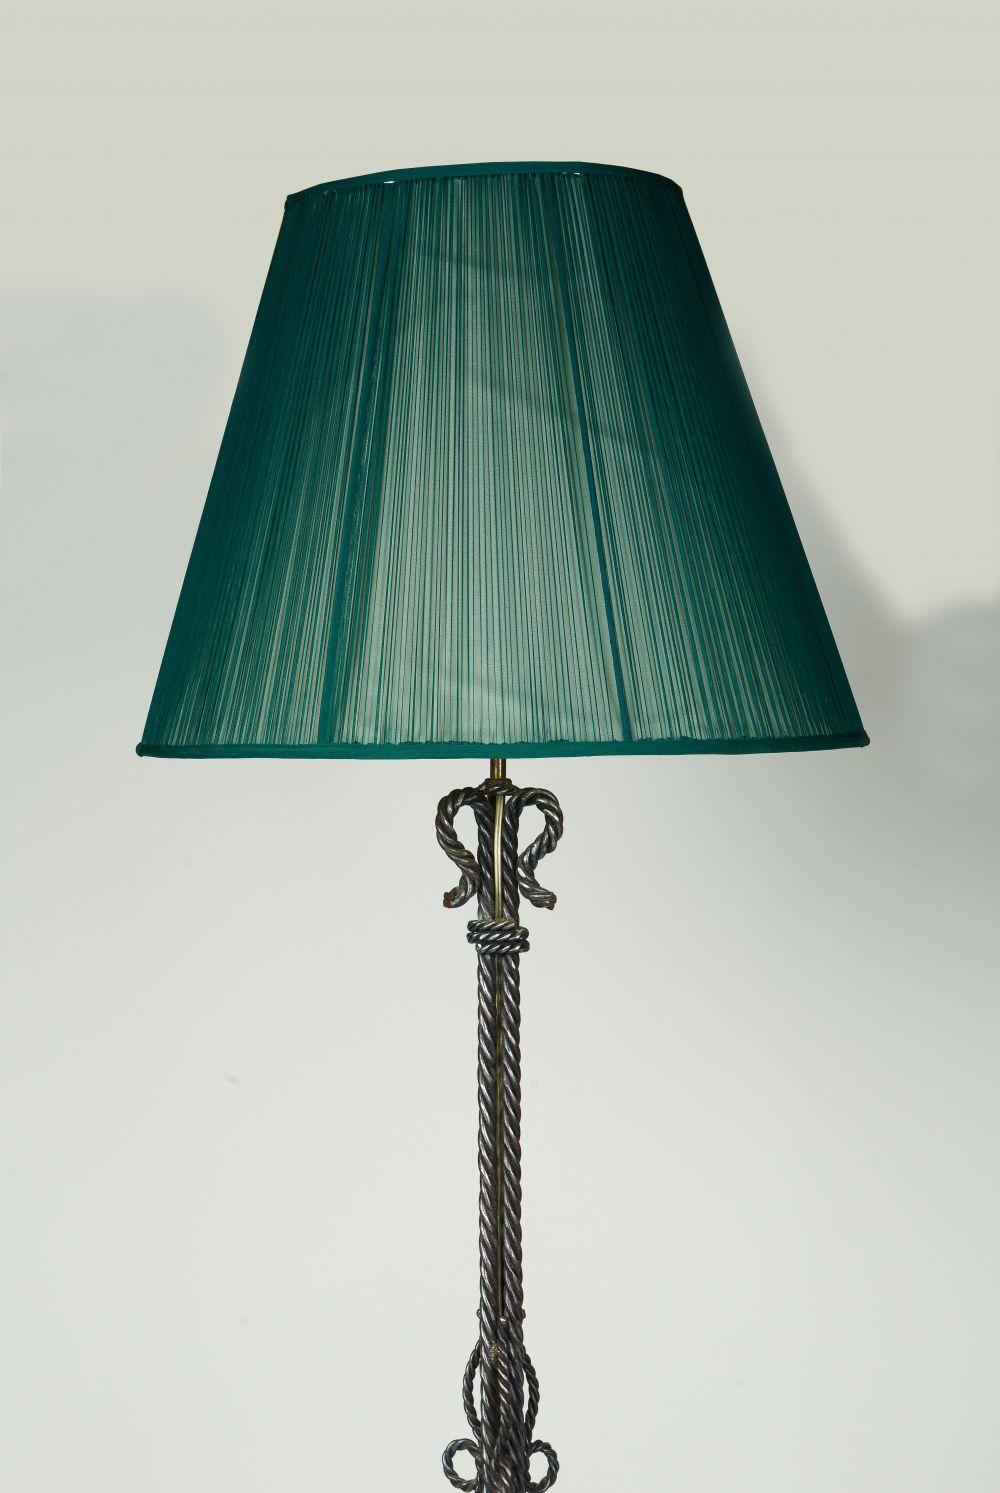 The wrought iron columnar support simulating rope, resting on the scrolling feet; fitted with two bulb sockets; with a vintage green silk shade.